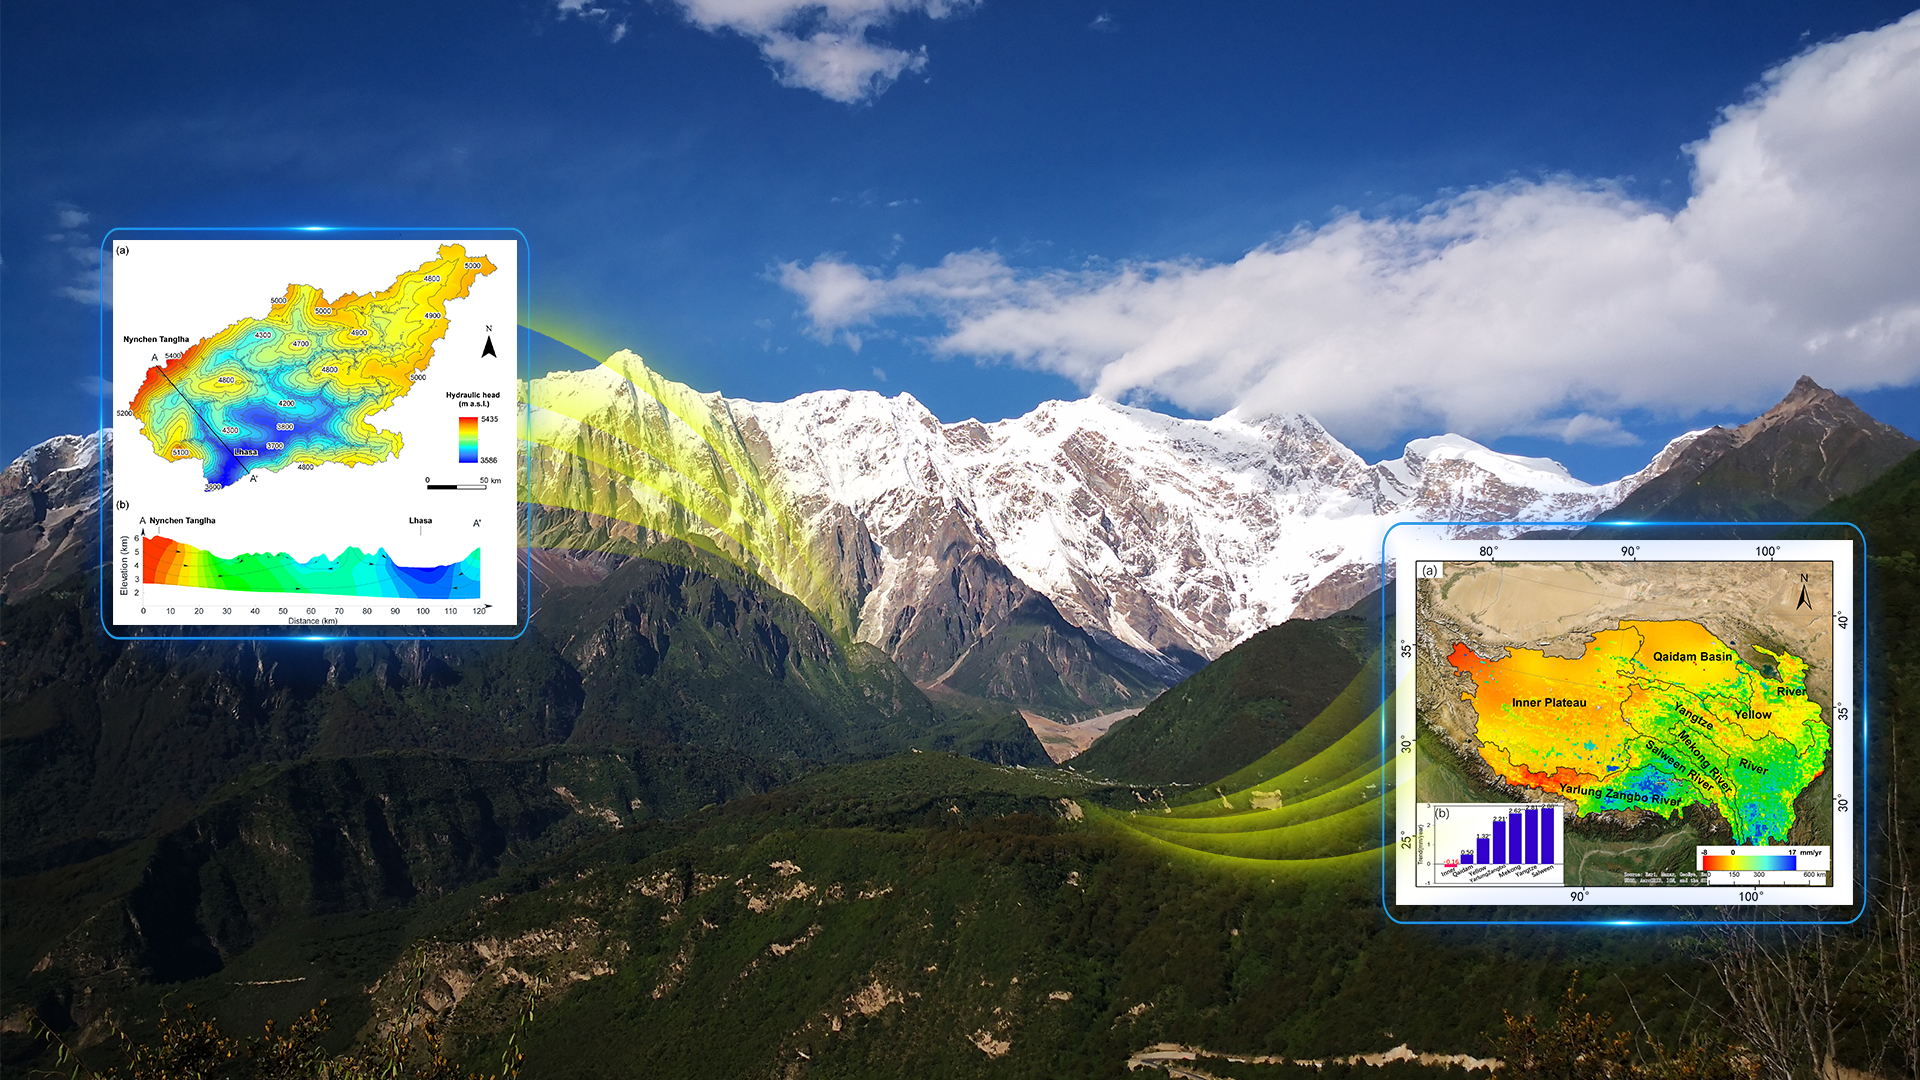 New findings on effect of climate change on hydrology of Tibetan Plateau